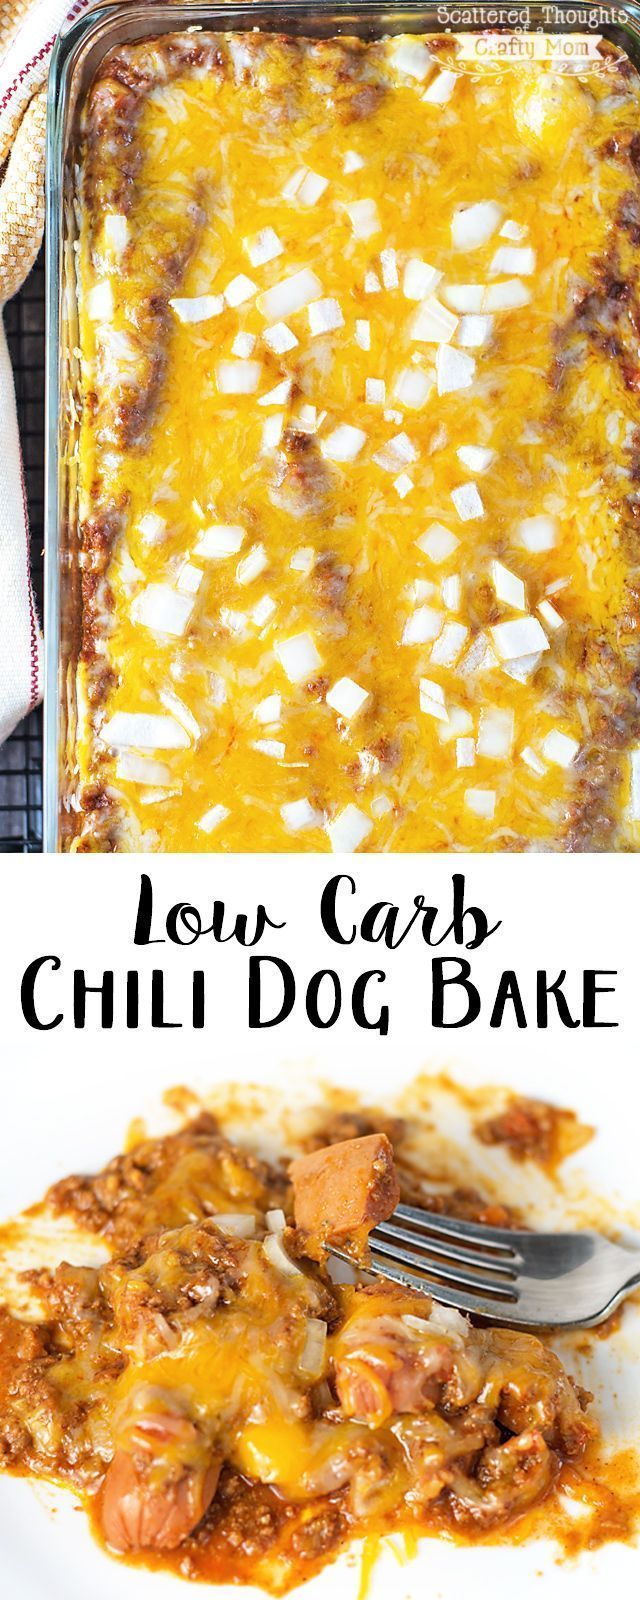 Eating Low Carb or Gluten Free?  You can still enjoy a Chili Dog with this Low Carb Chili Dog Bake Recipe! -   25 low carb beef recipes
 ideas